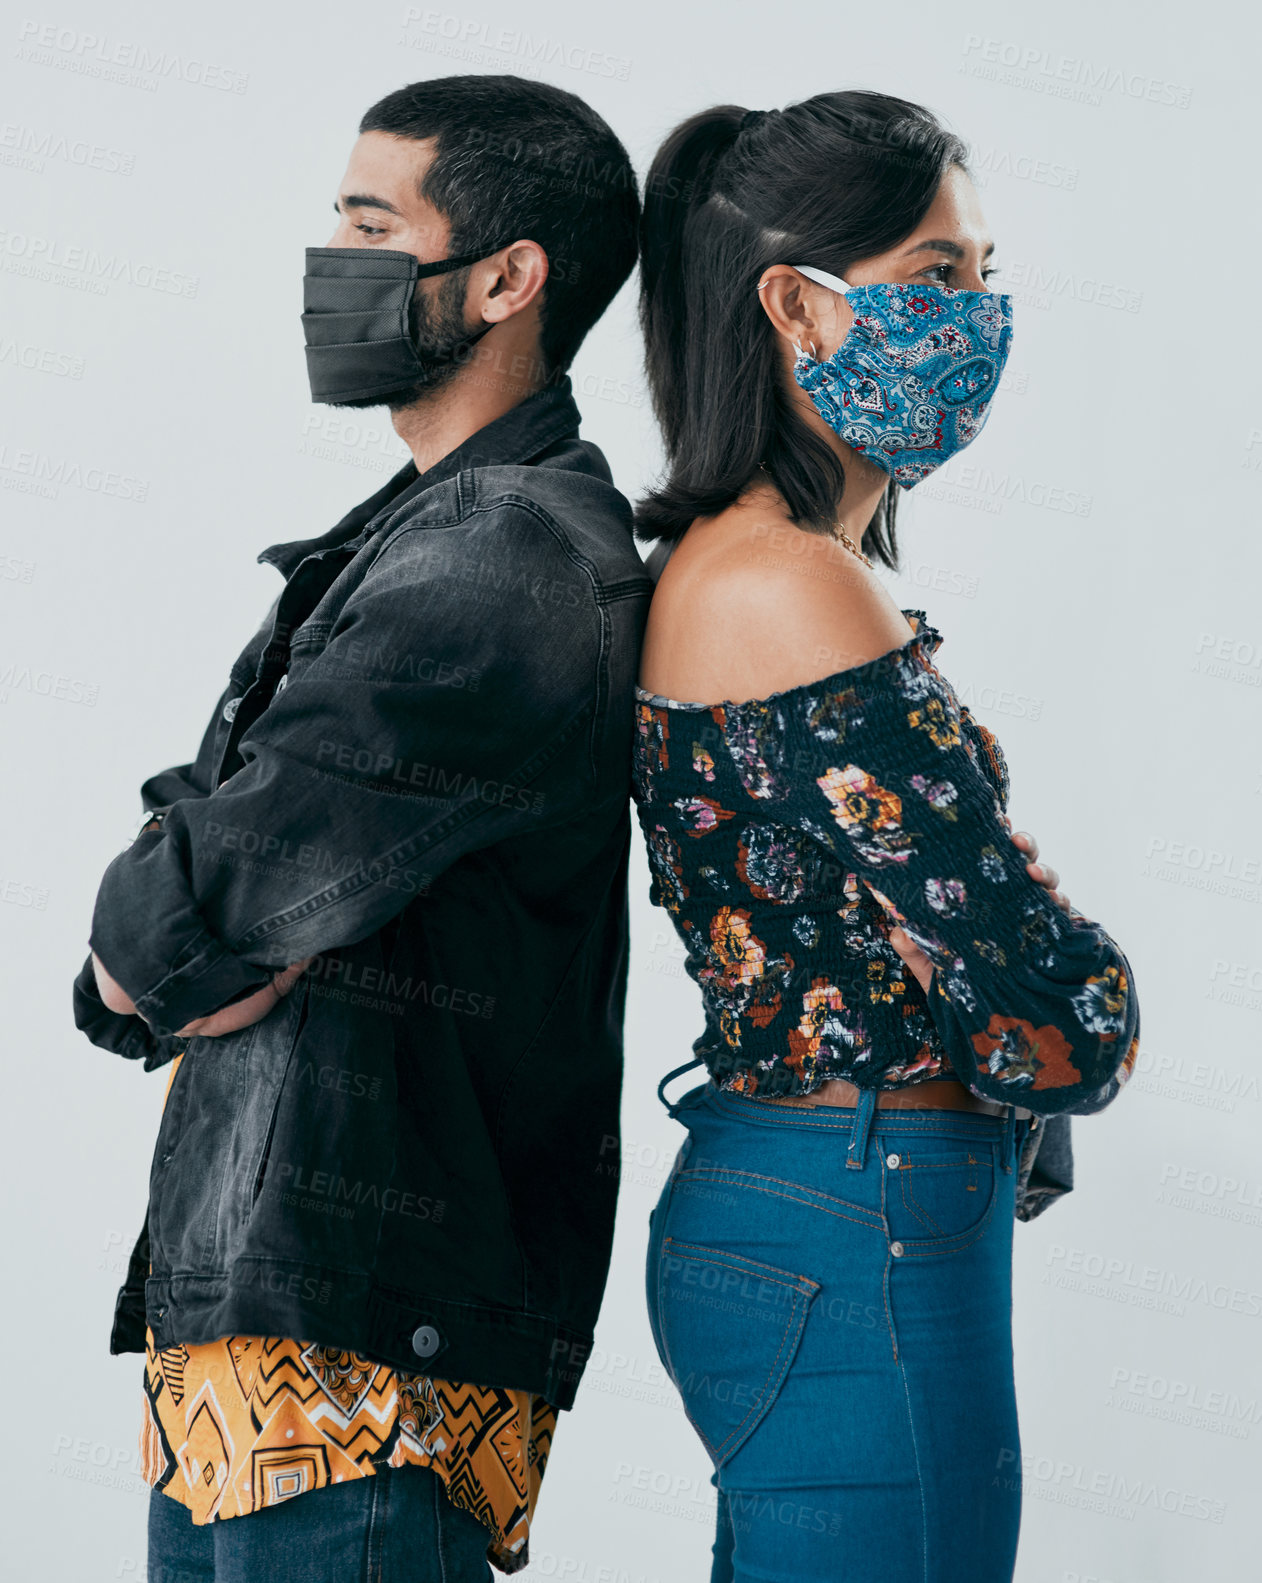 Buy stock photo Studio shot of a masked young man and woman posing against a grey background